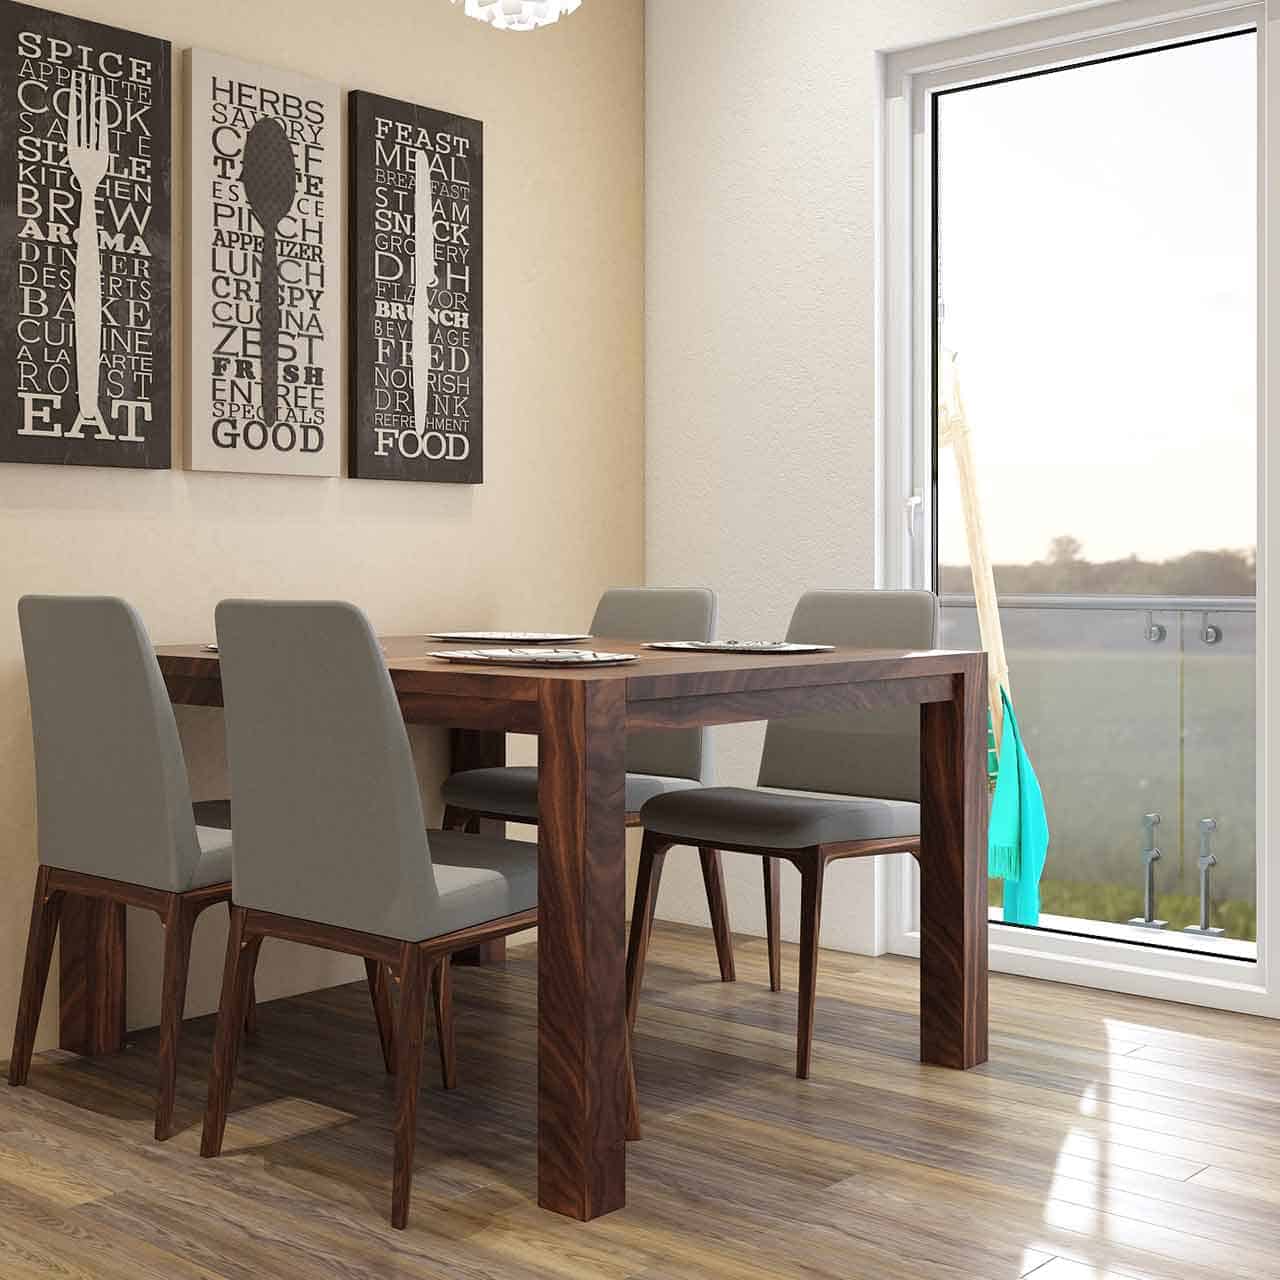 Simple dining room design where light tables and chairs that aren’t bulky are ideal for simple dining room design styles